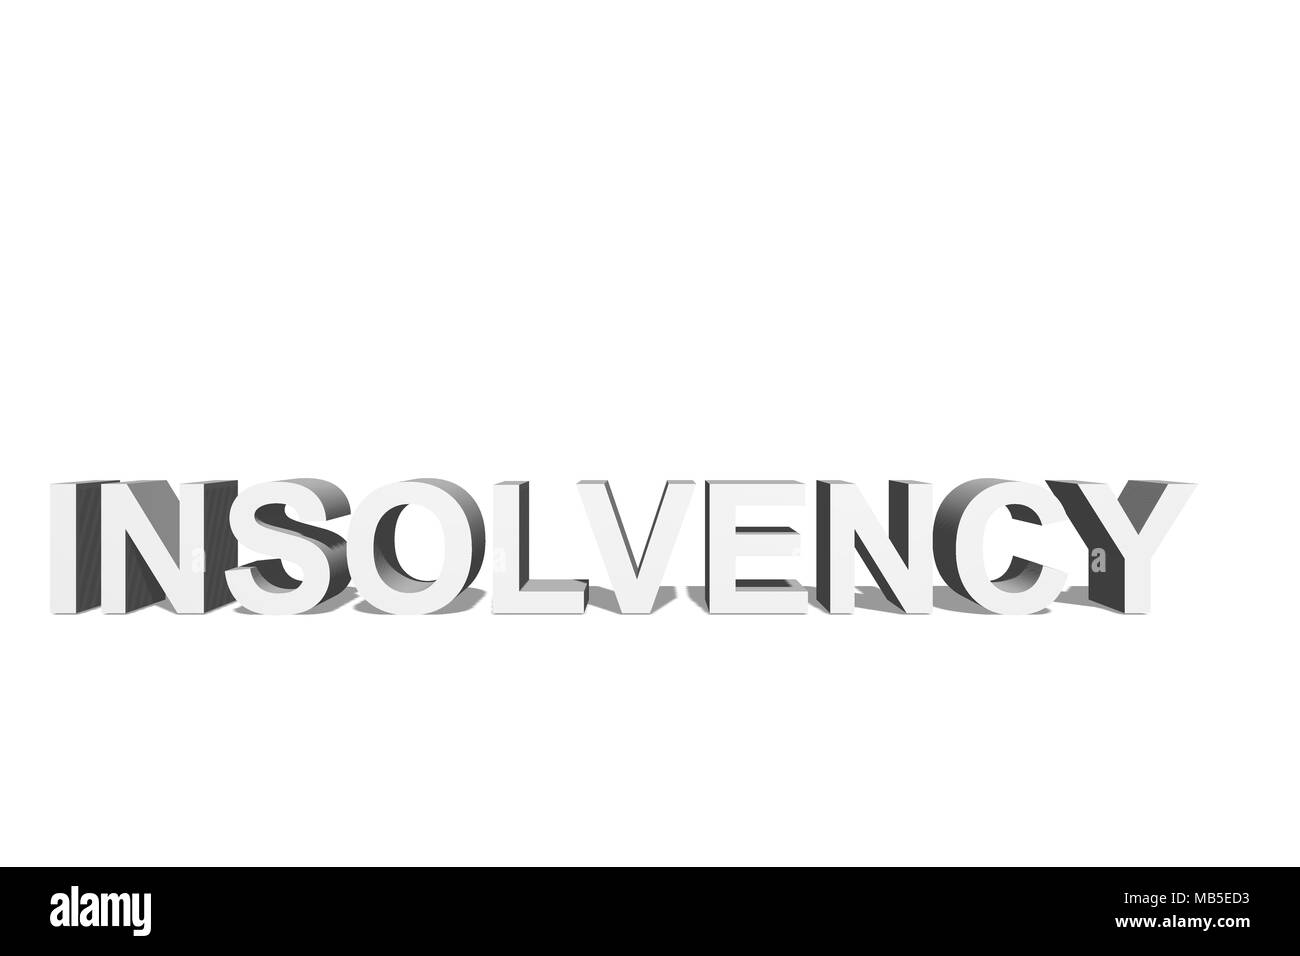 Insolvency as text for the background as a template Stock Photo